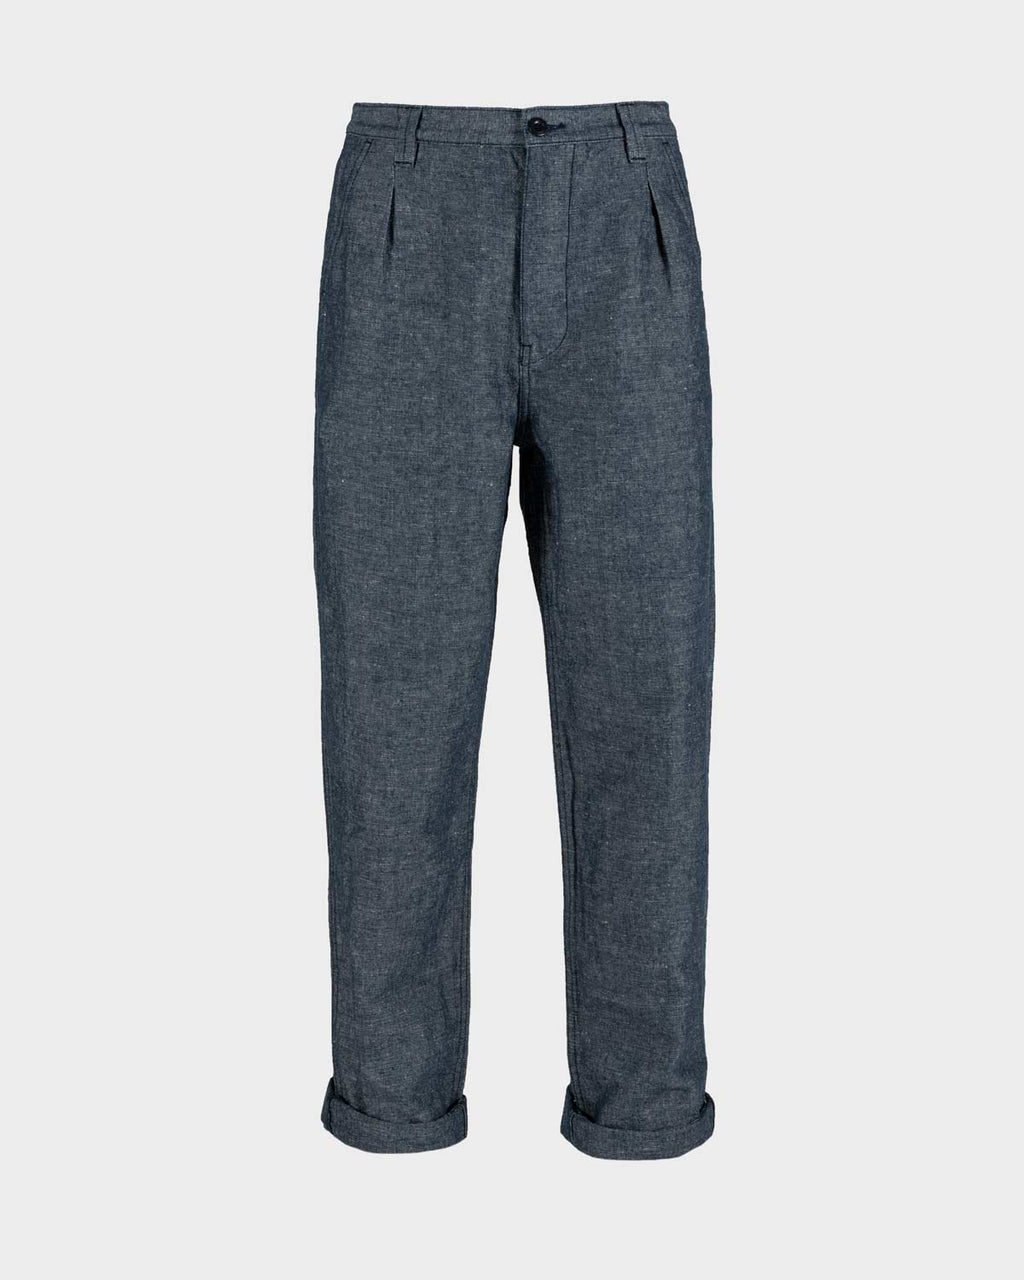 Nigel Cabourn Cotton Linen Pleated Chino Pants - Black Navy – The